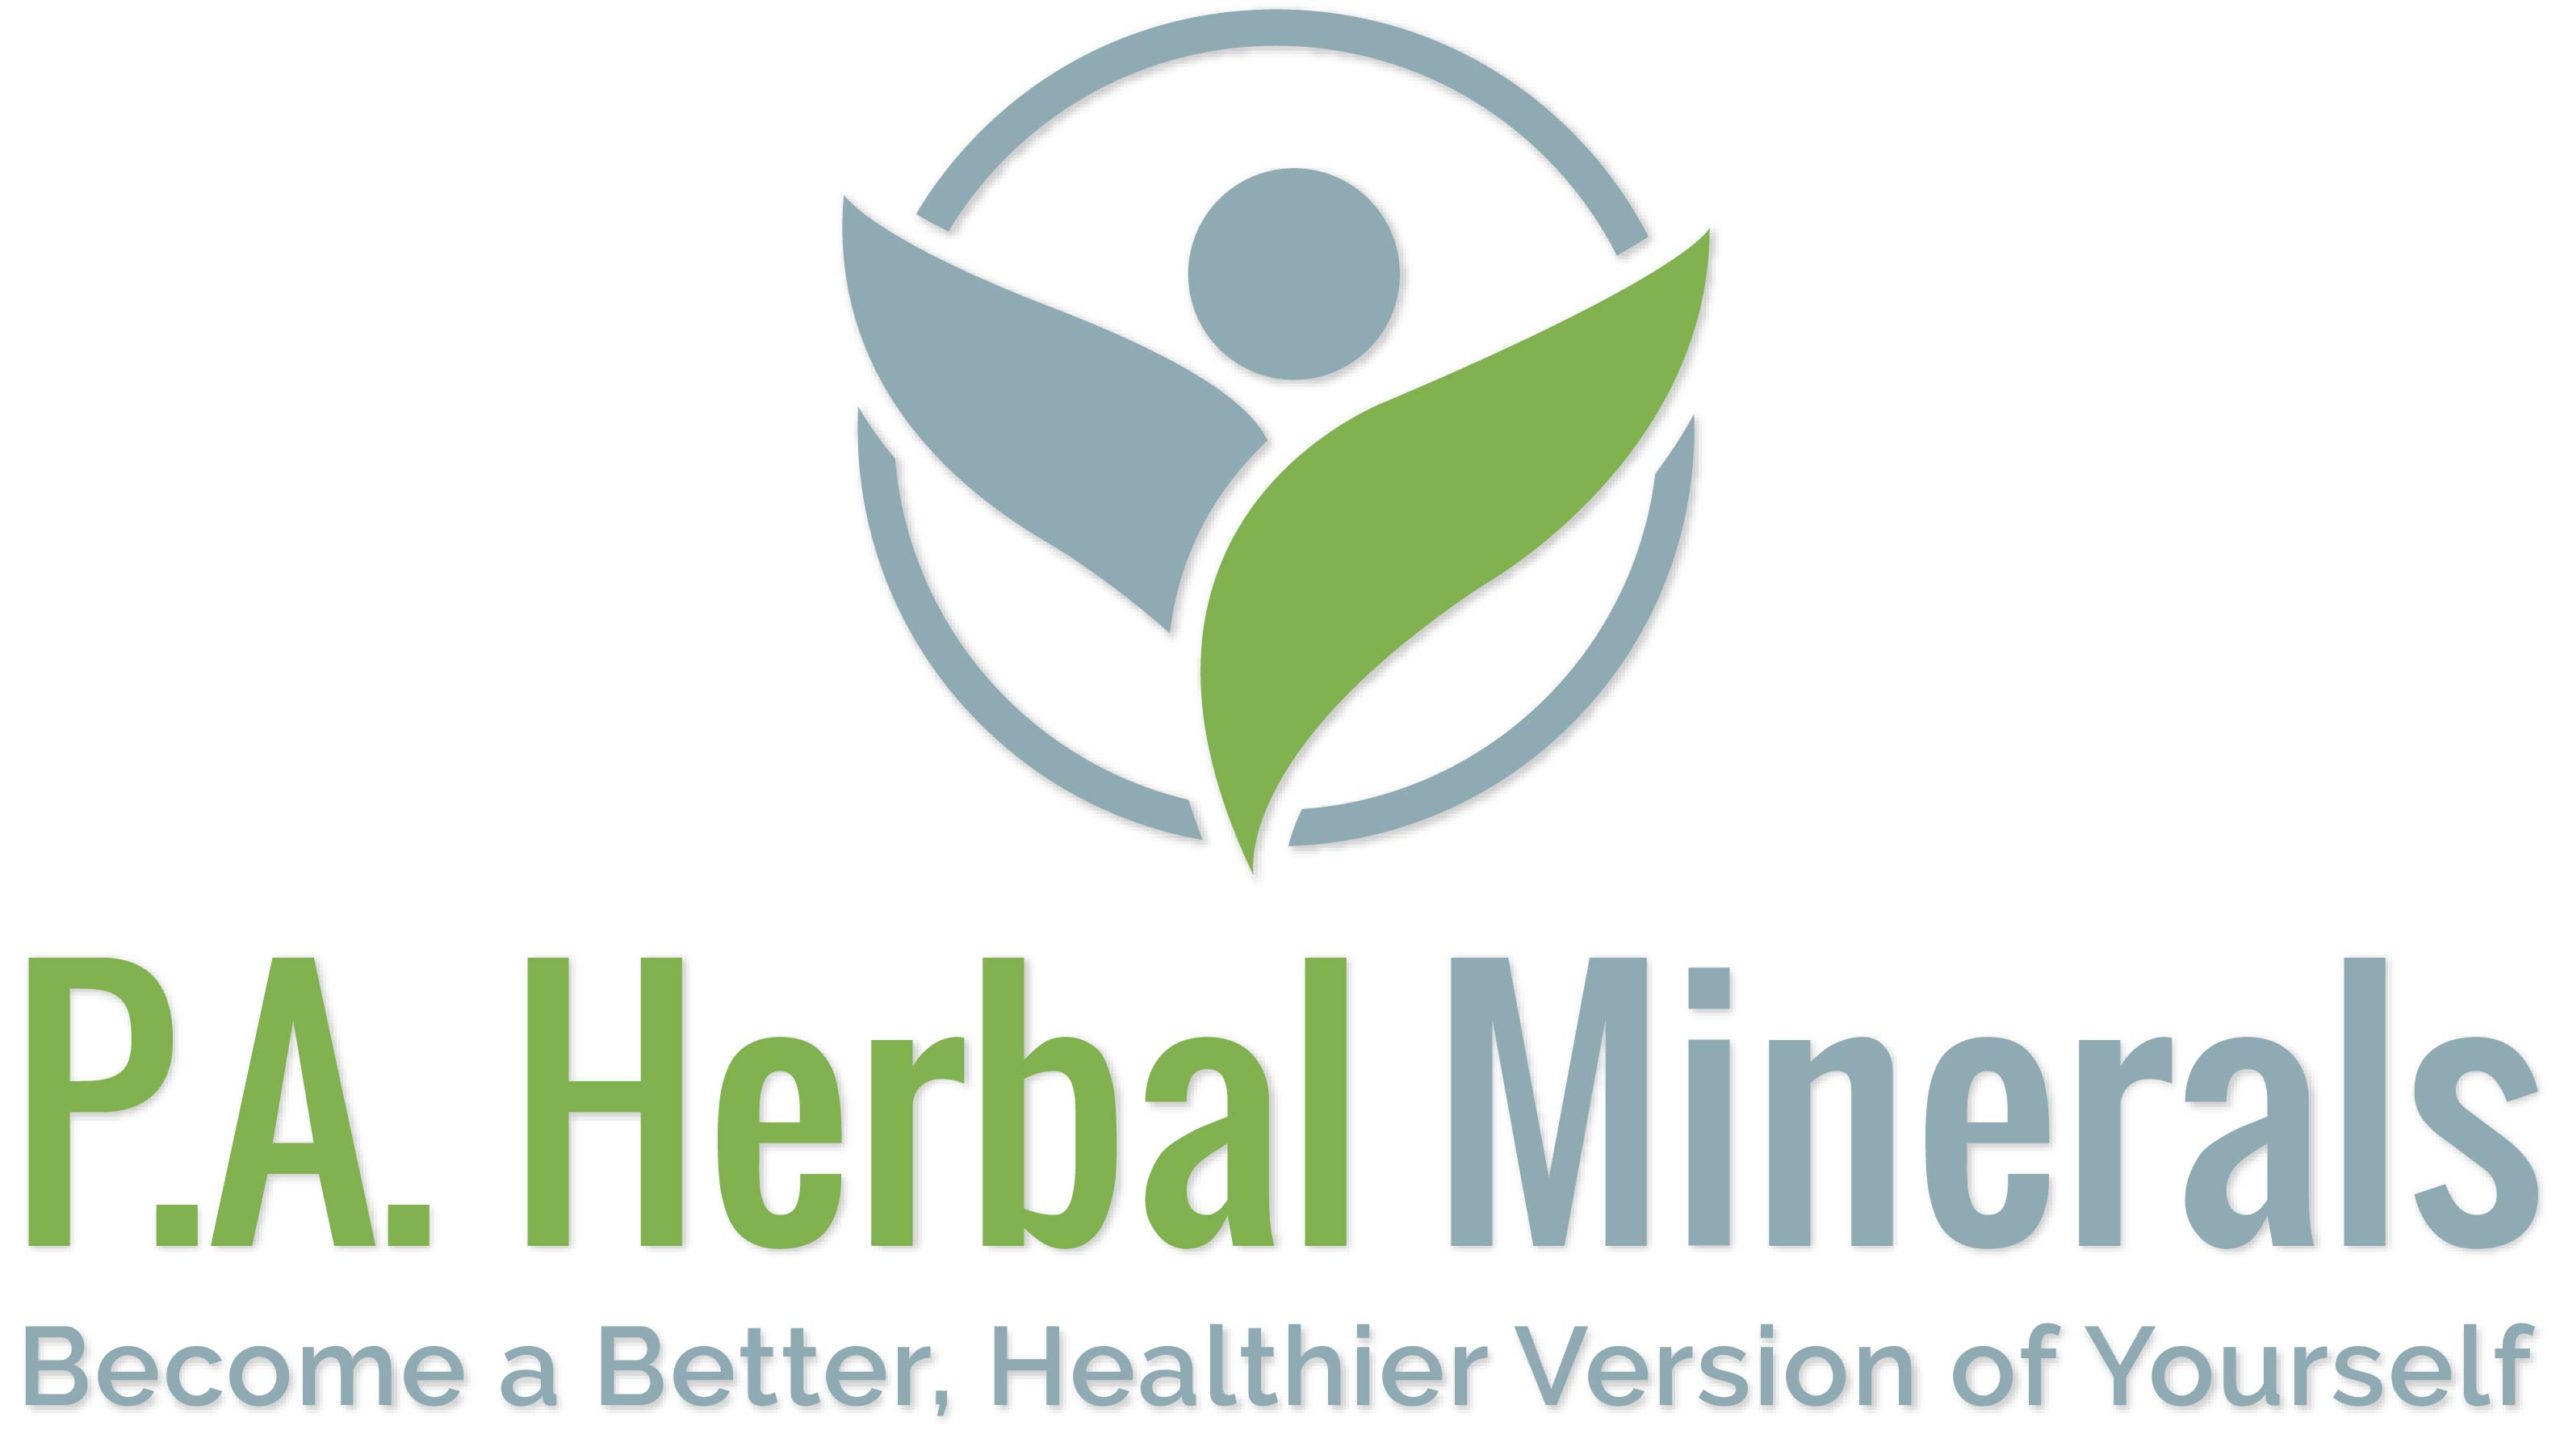 P.A. Herbal Minerals